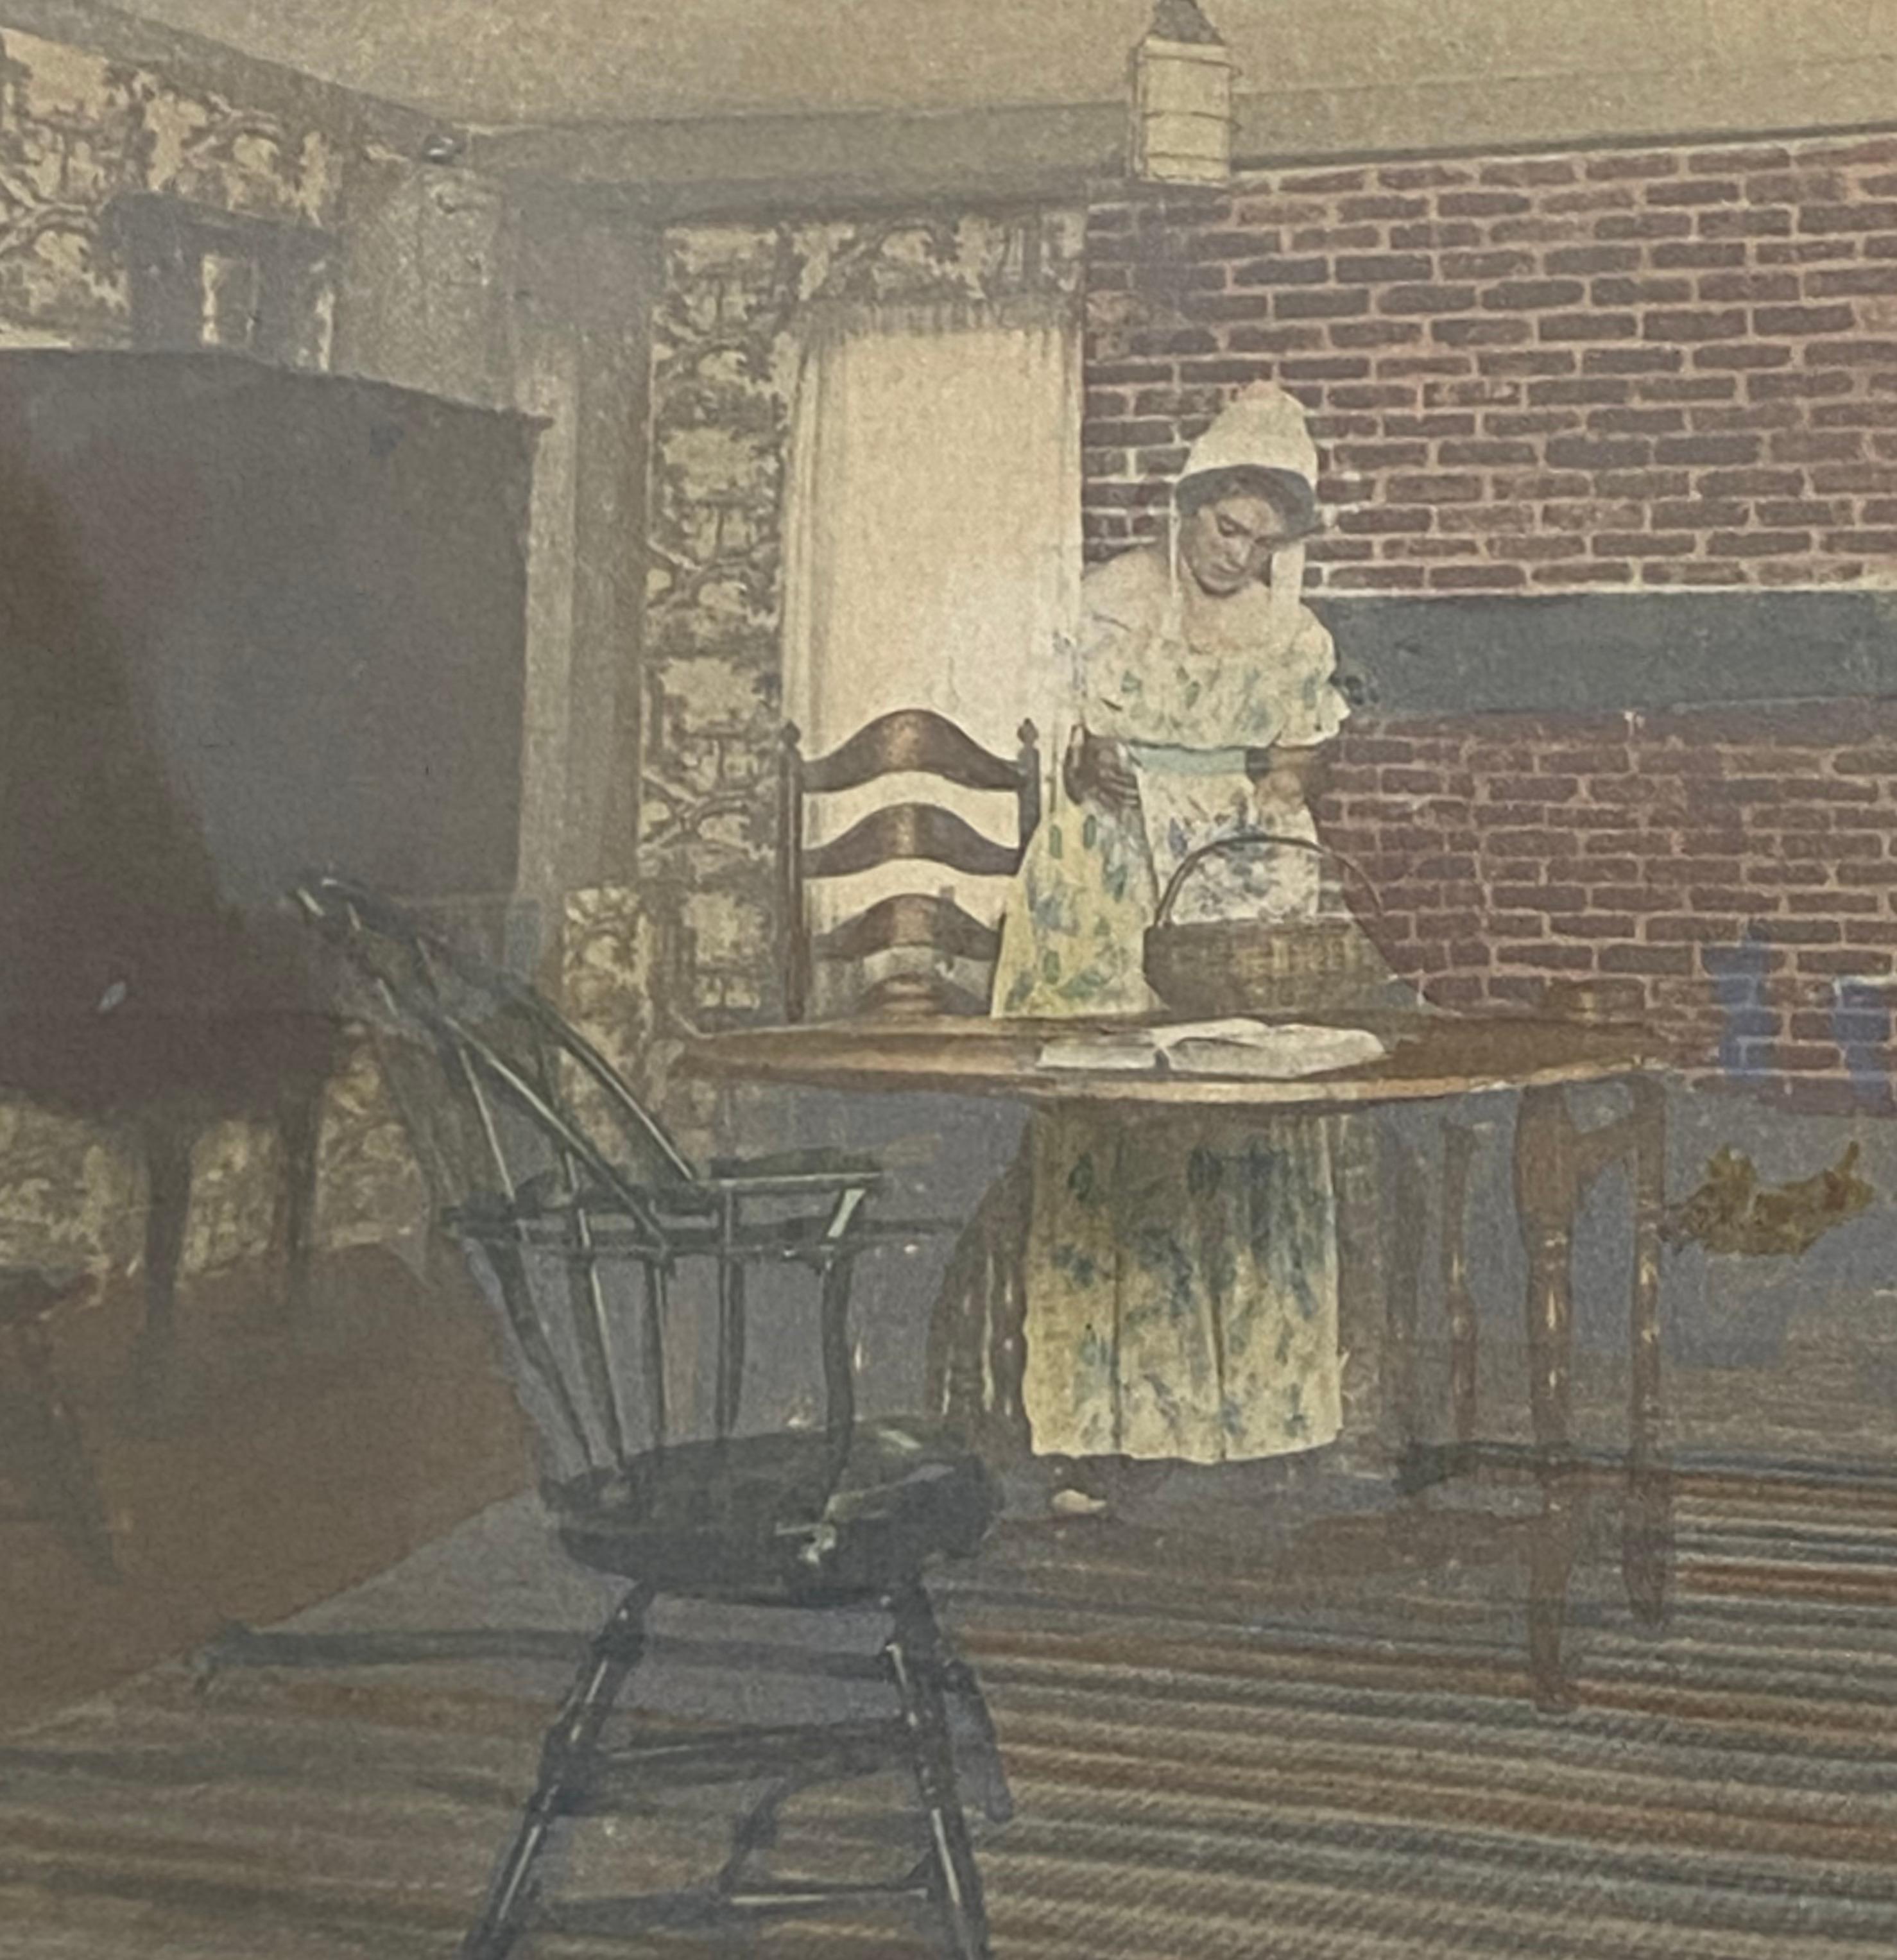 Pair of Early 20th Century Hand Tinted Interior Scene Photographs by Wallace Nutting C.1910

Antique photographs - highly detailed - hand colored

Signed by Nutting

One photo measures 5